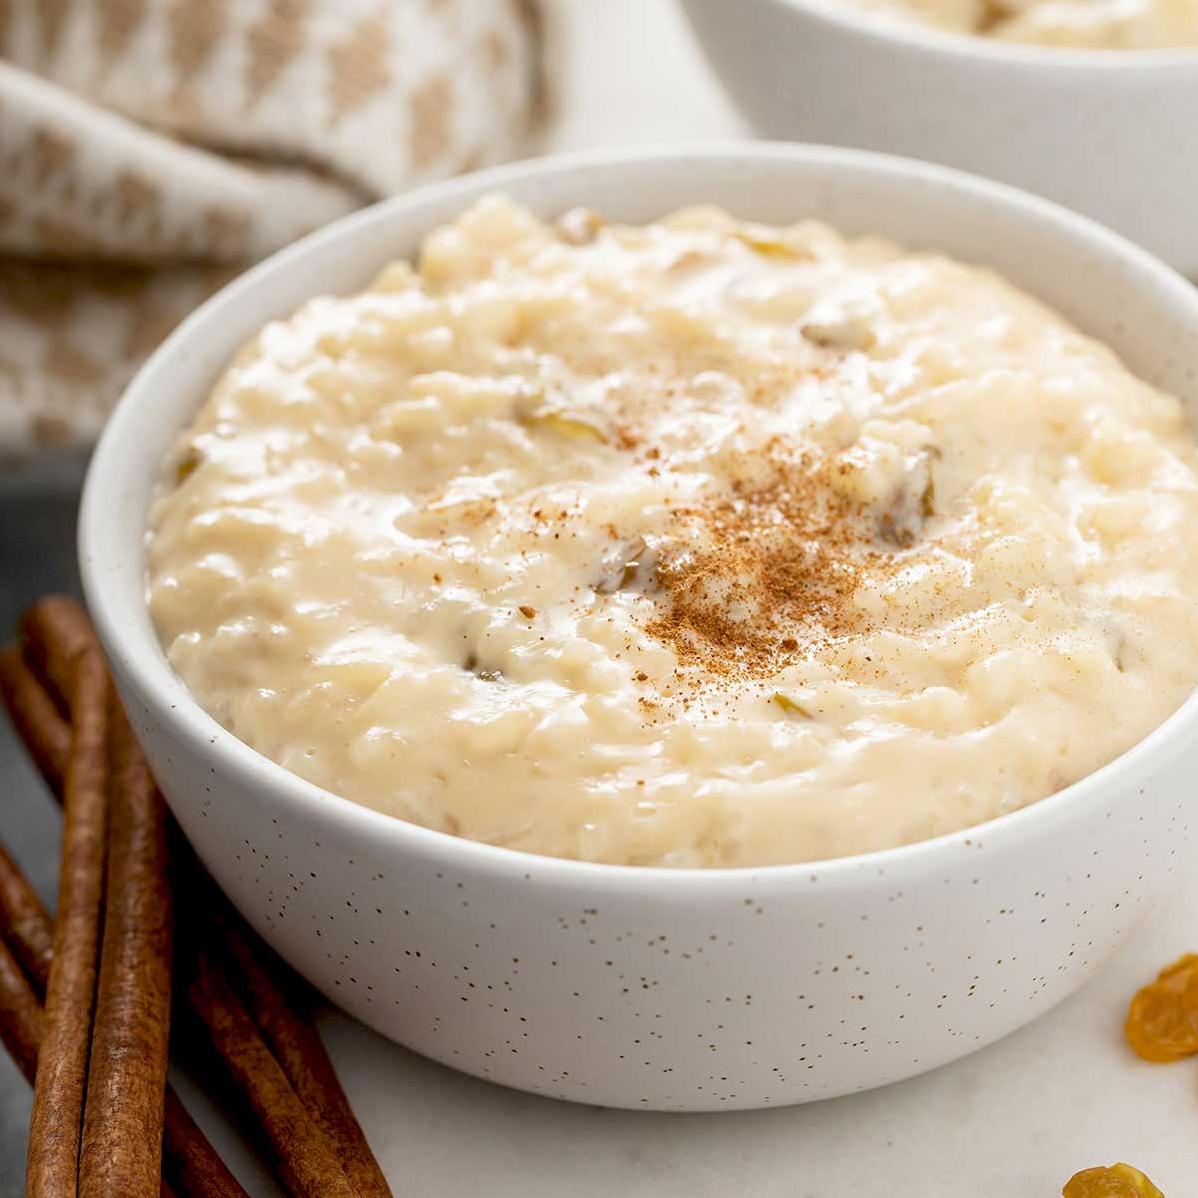  The creamy texture and cinnamon flavor of Arroz Con Leche is irresistible.